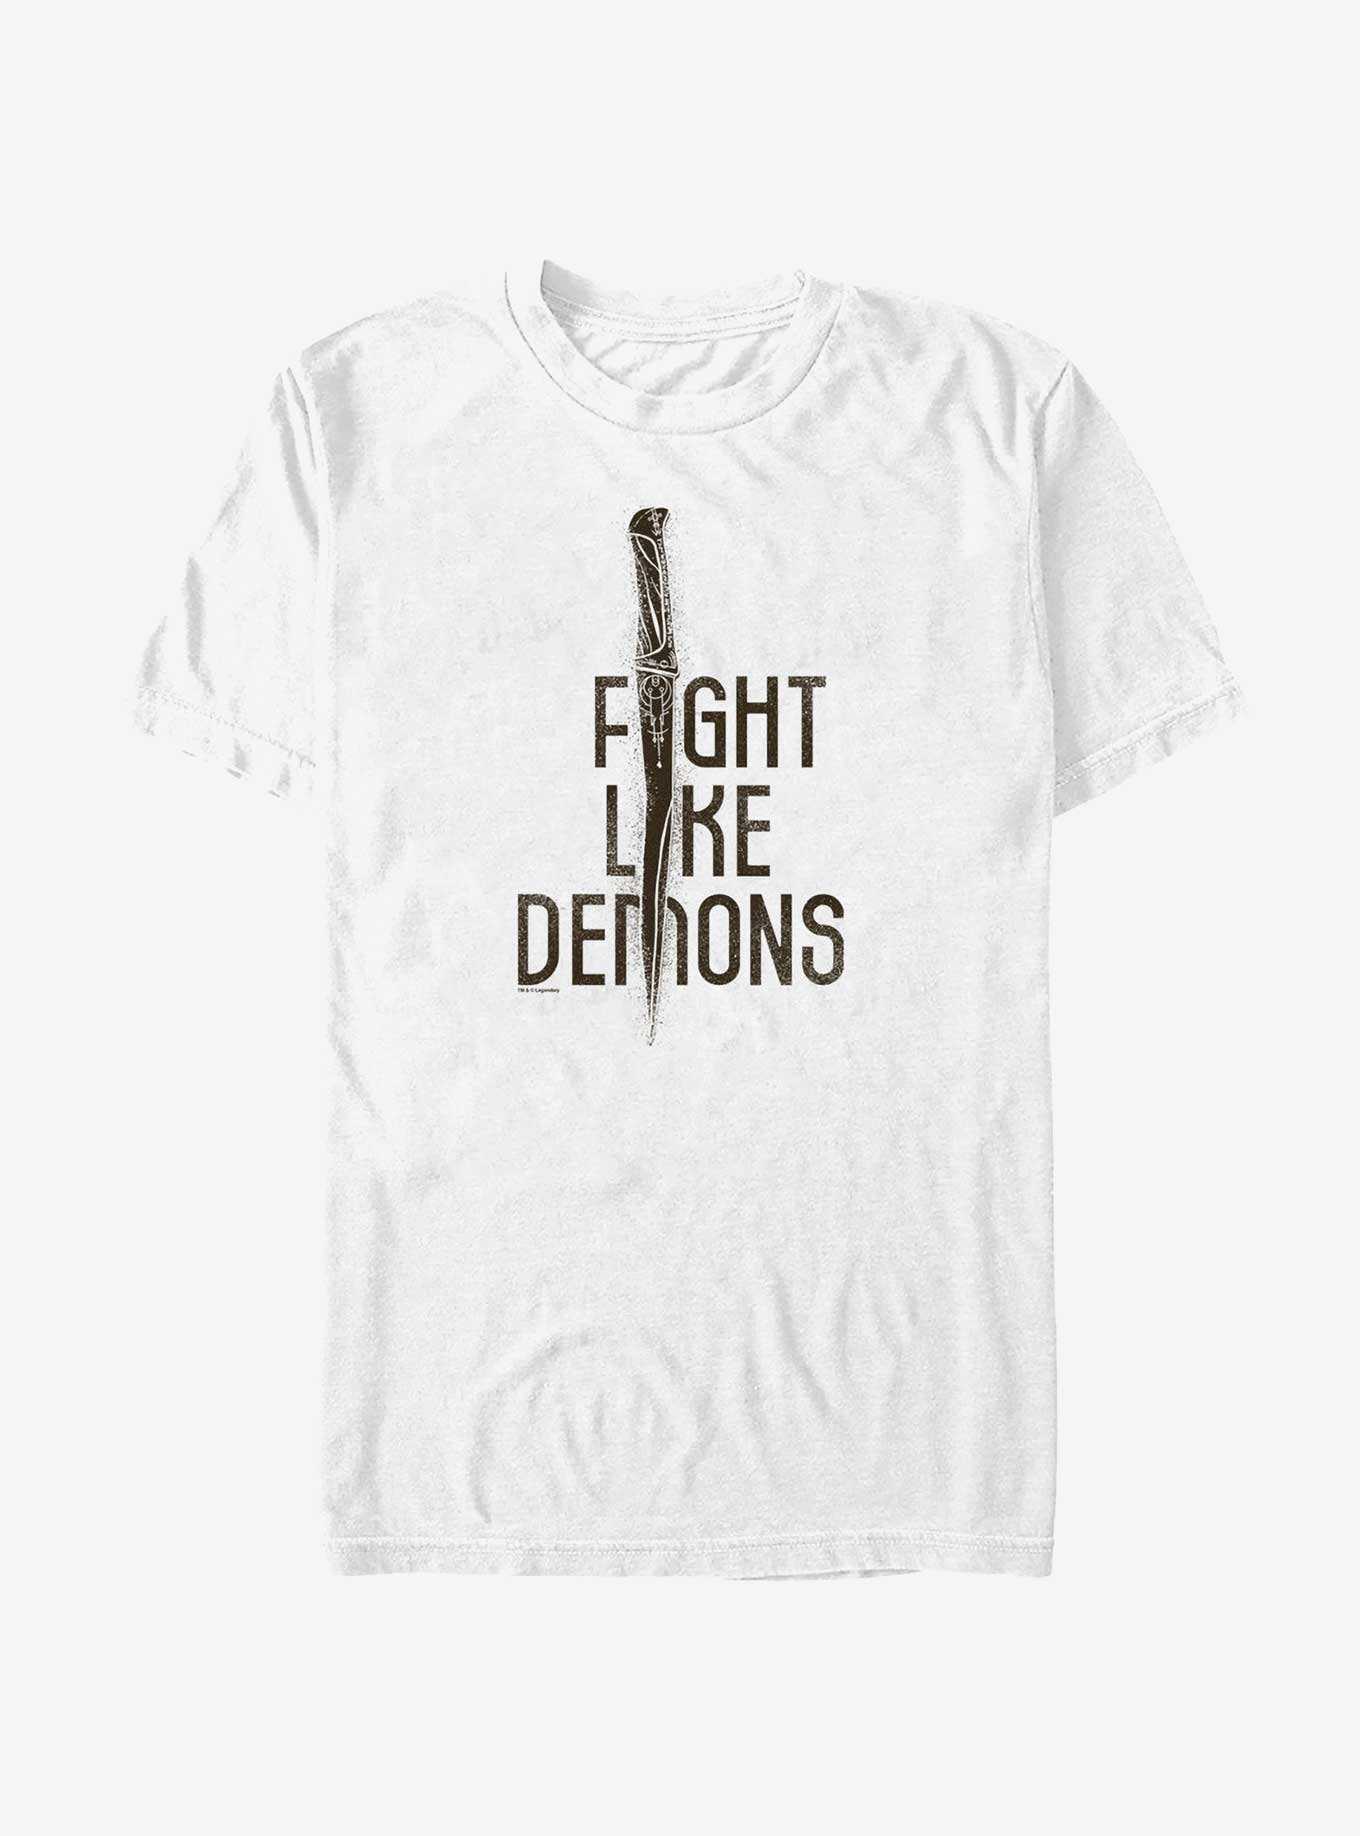 Dune: Part Two Fight Like Demons T-Shirt, , hi-res